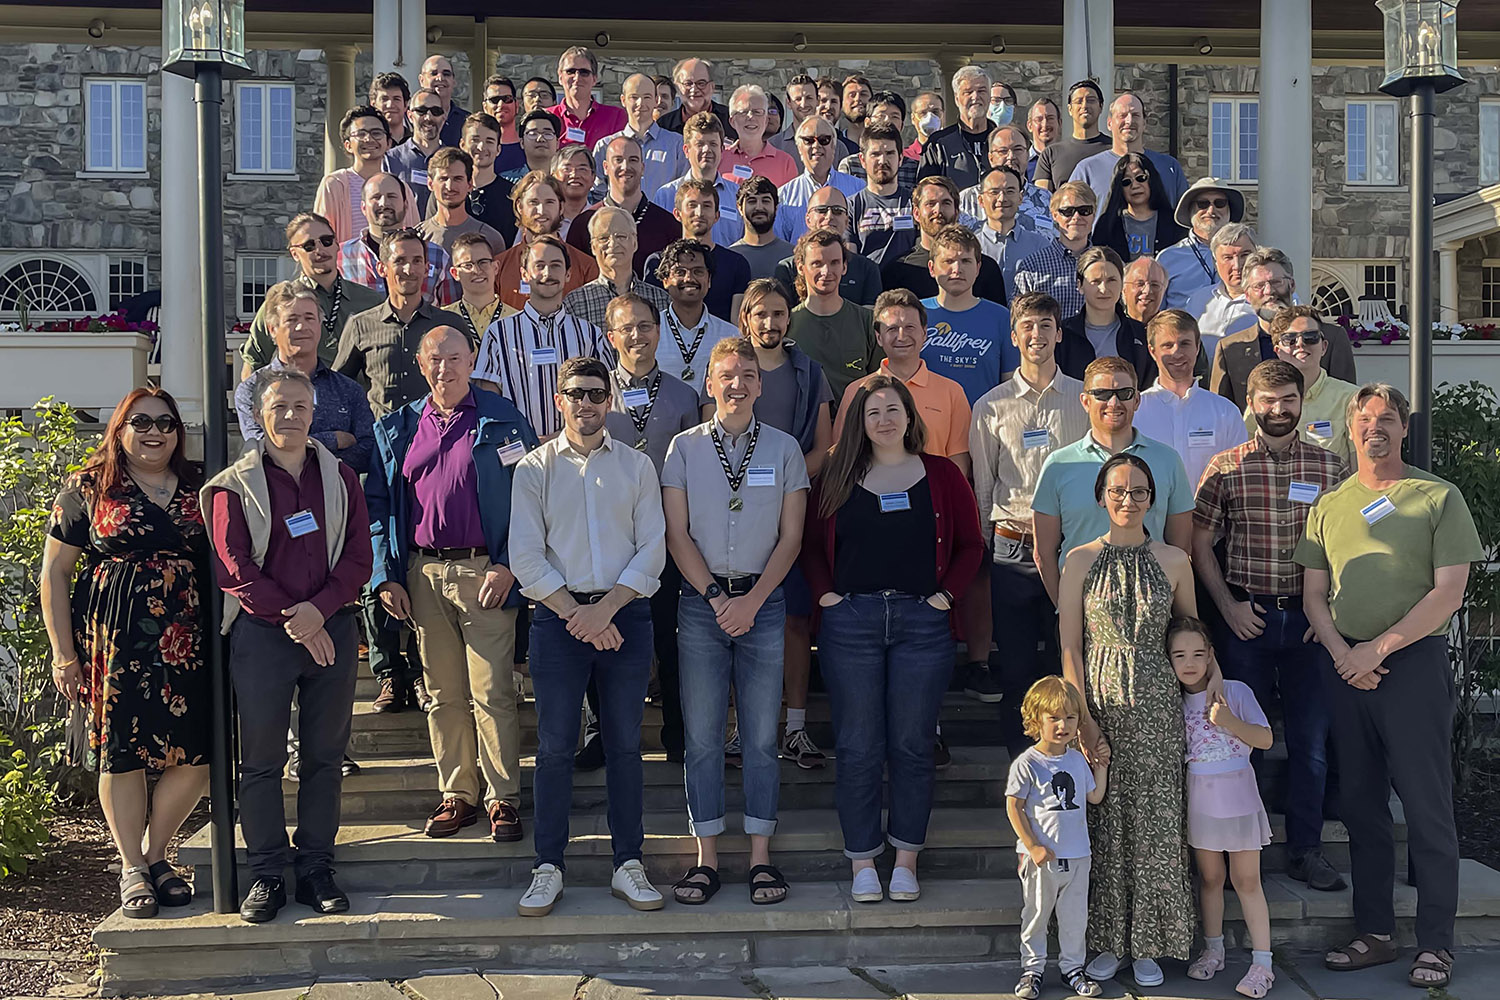 Anomalous Absorption Conference group photo.